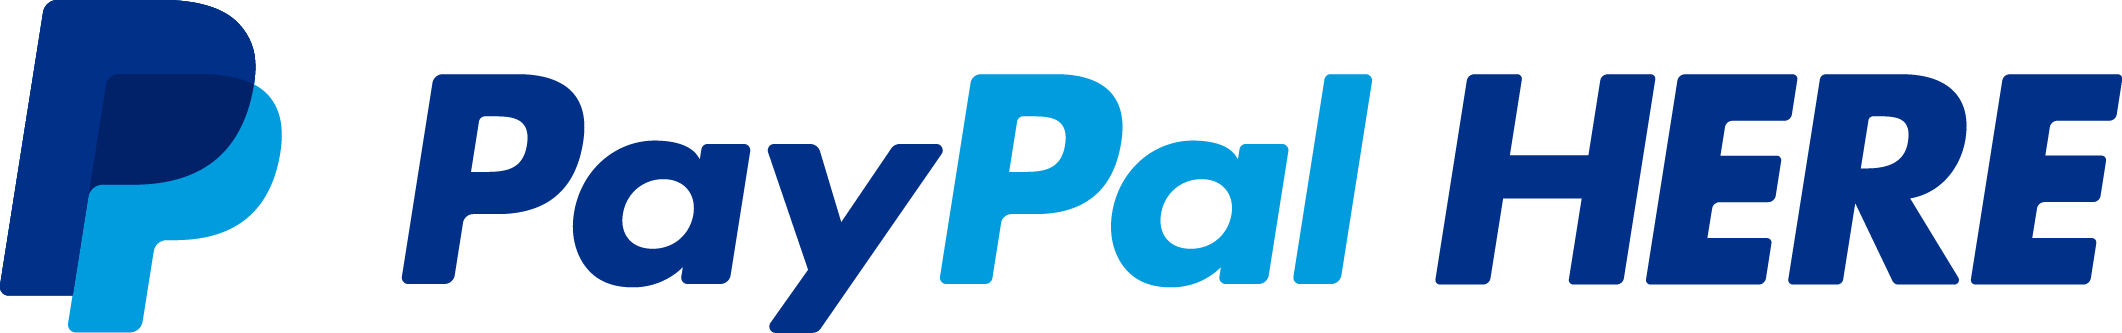 PayPal Here Logo - Sign Up For PayPal Here